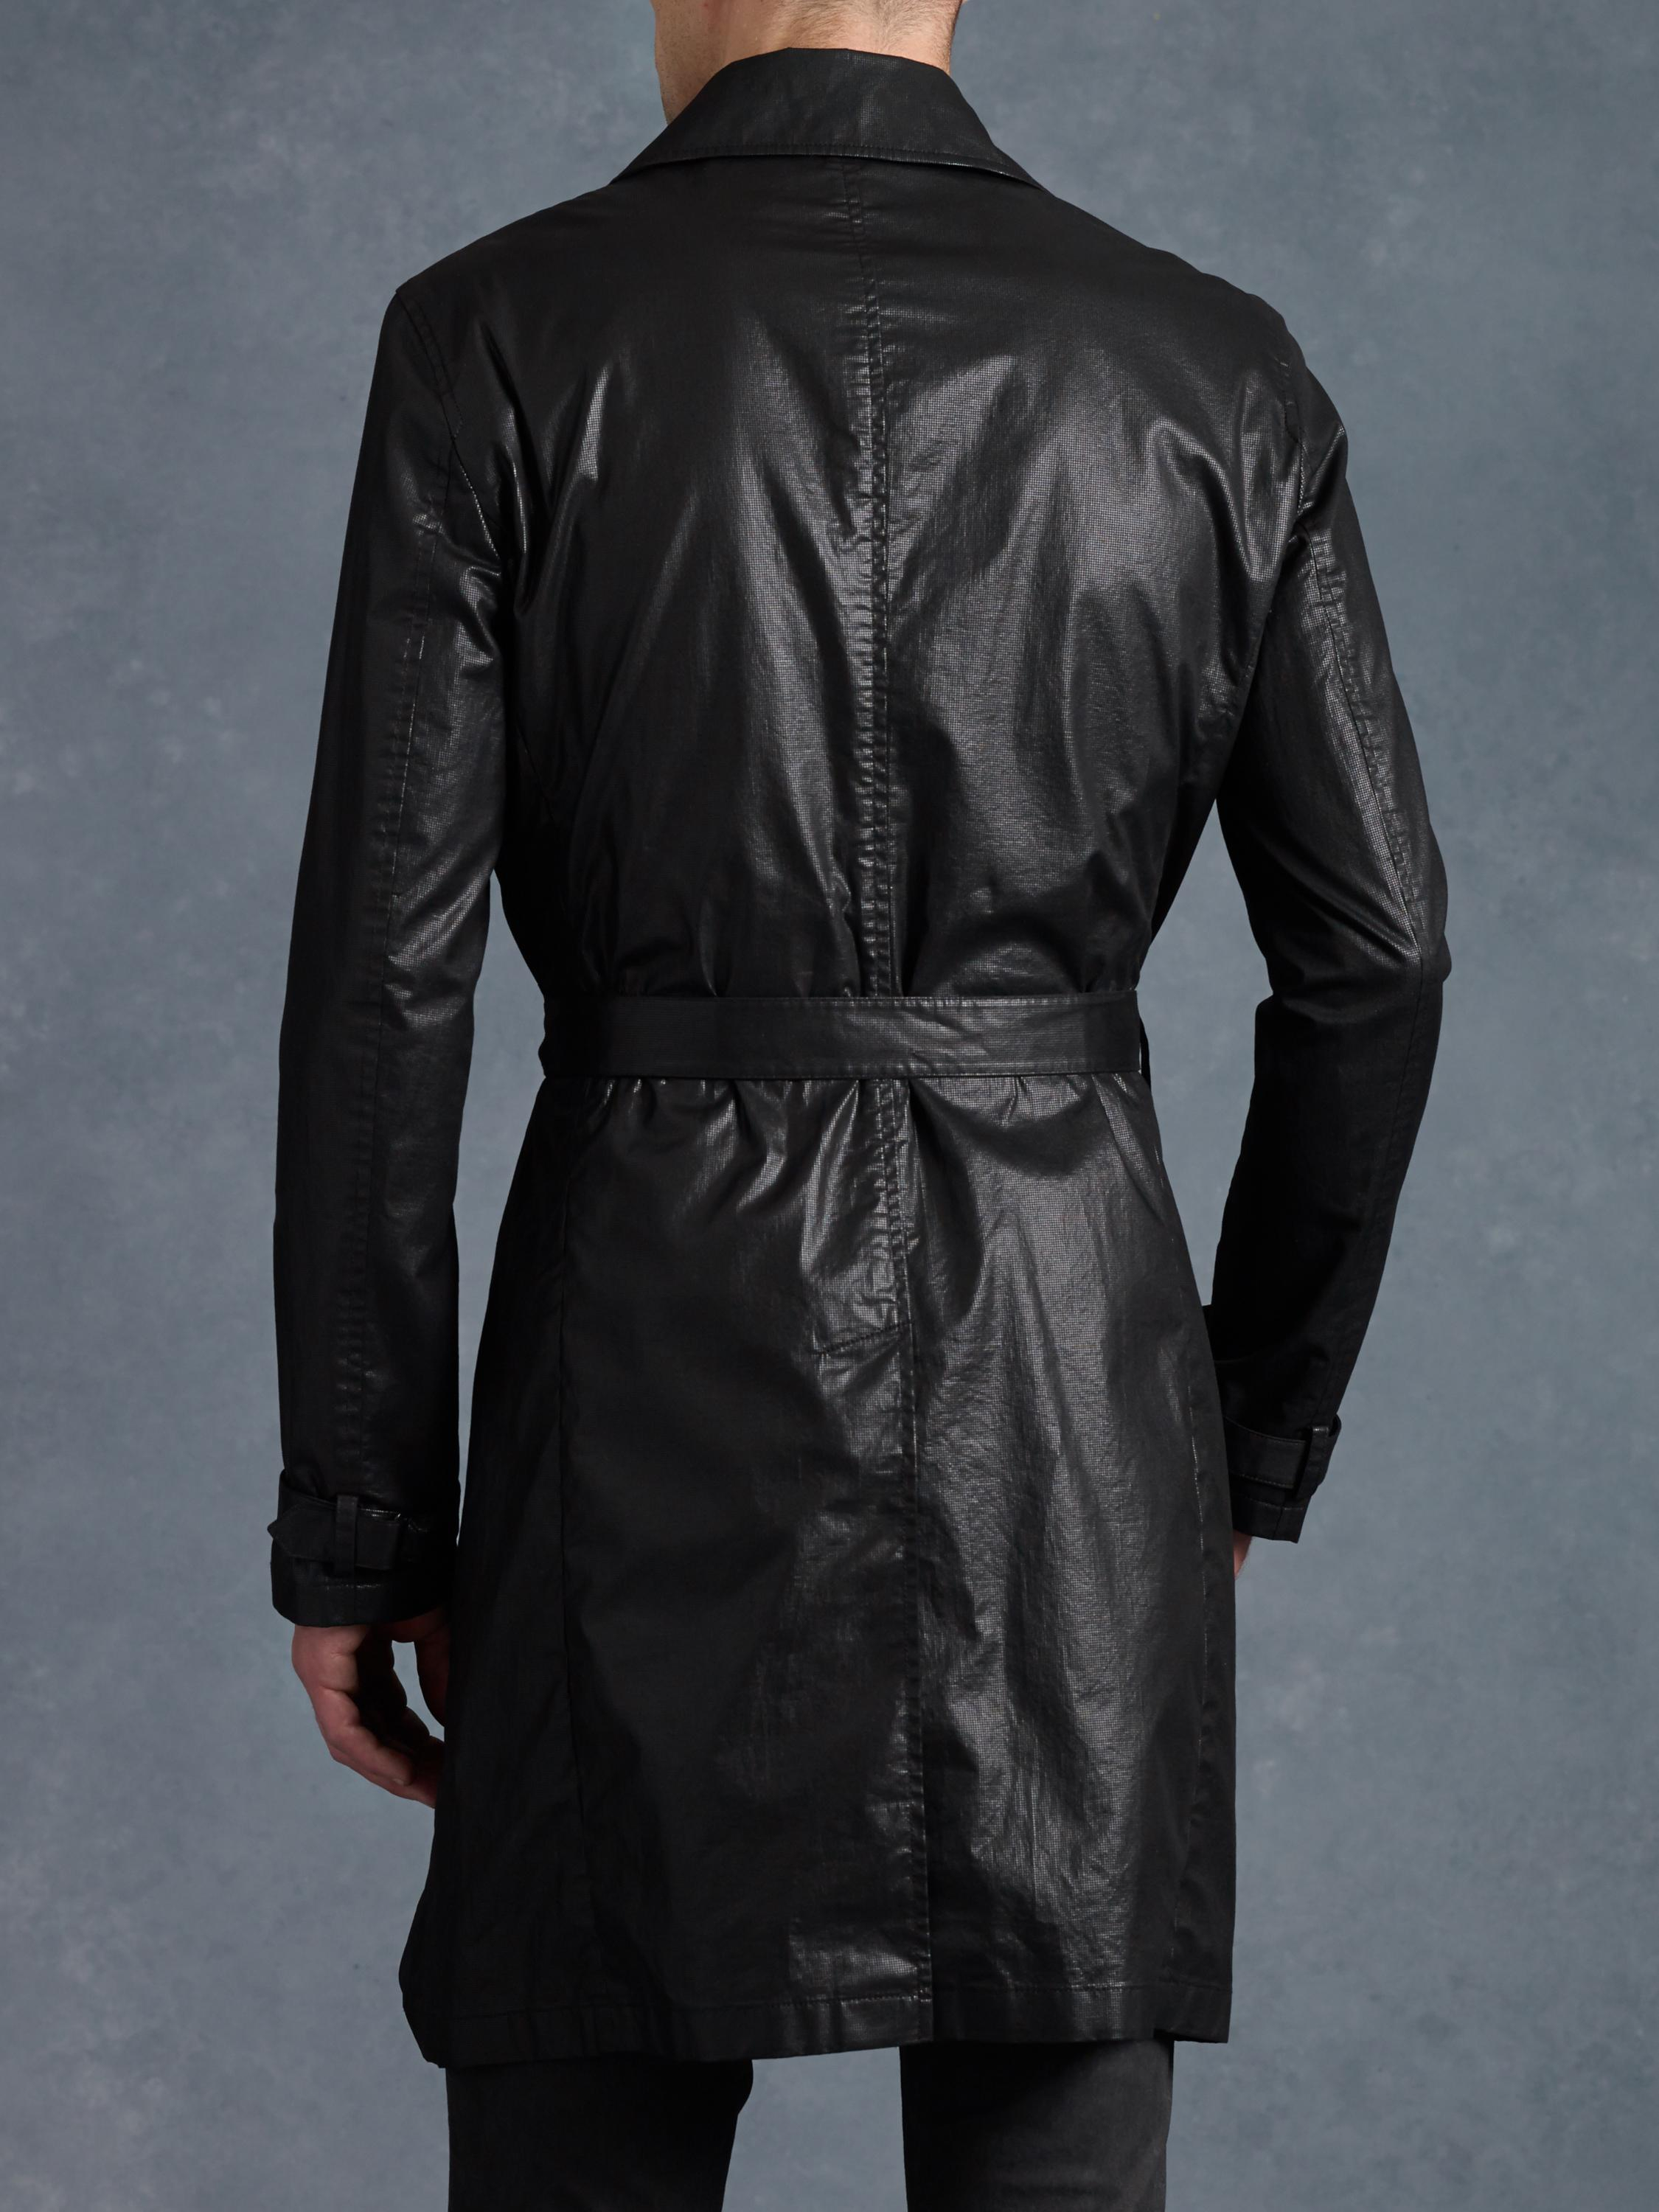 Lyst - John Varvatos Double Breasted Trench Coat in Black for Men